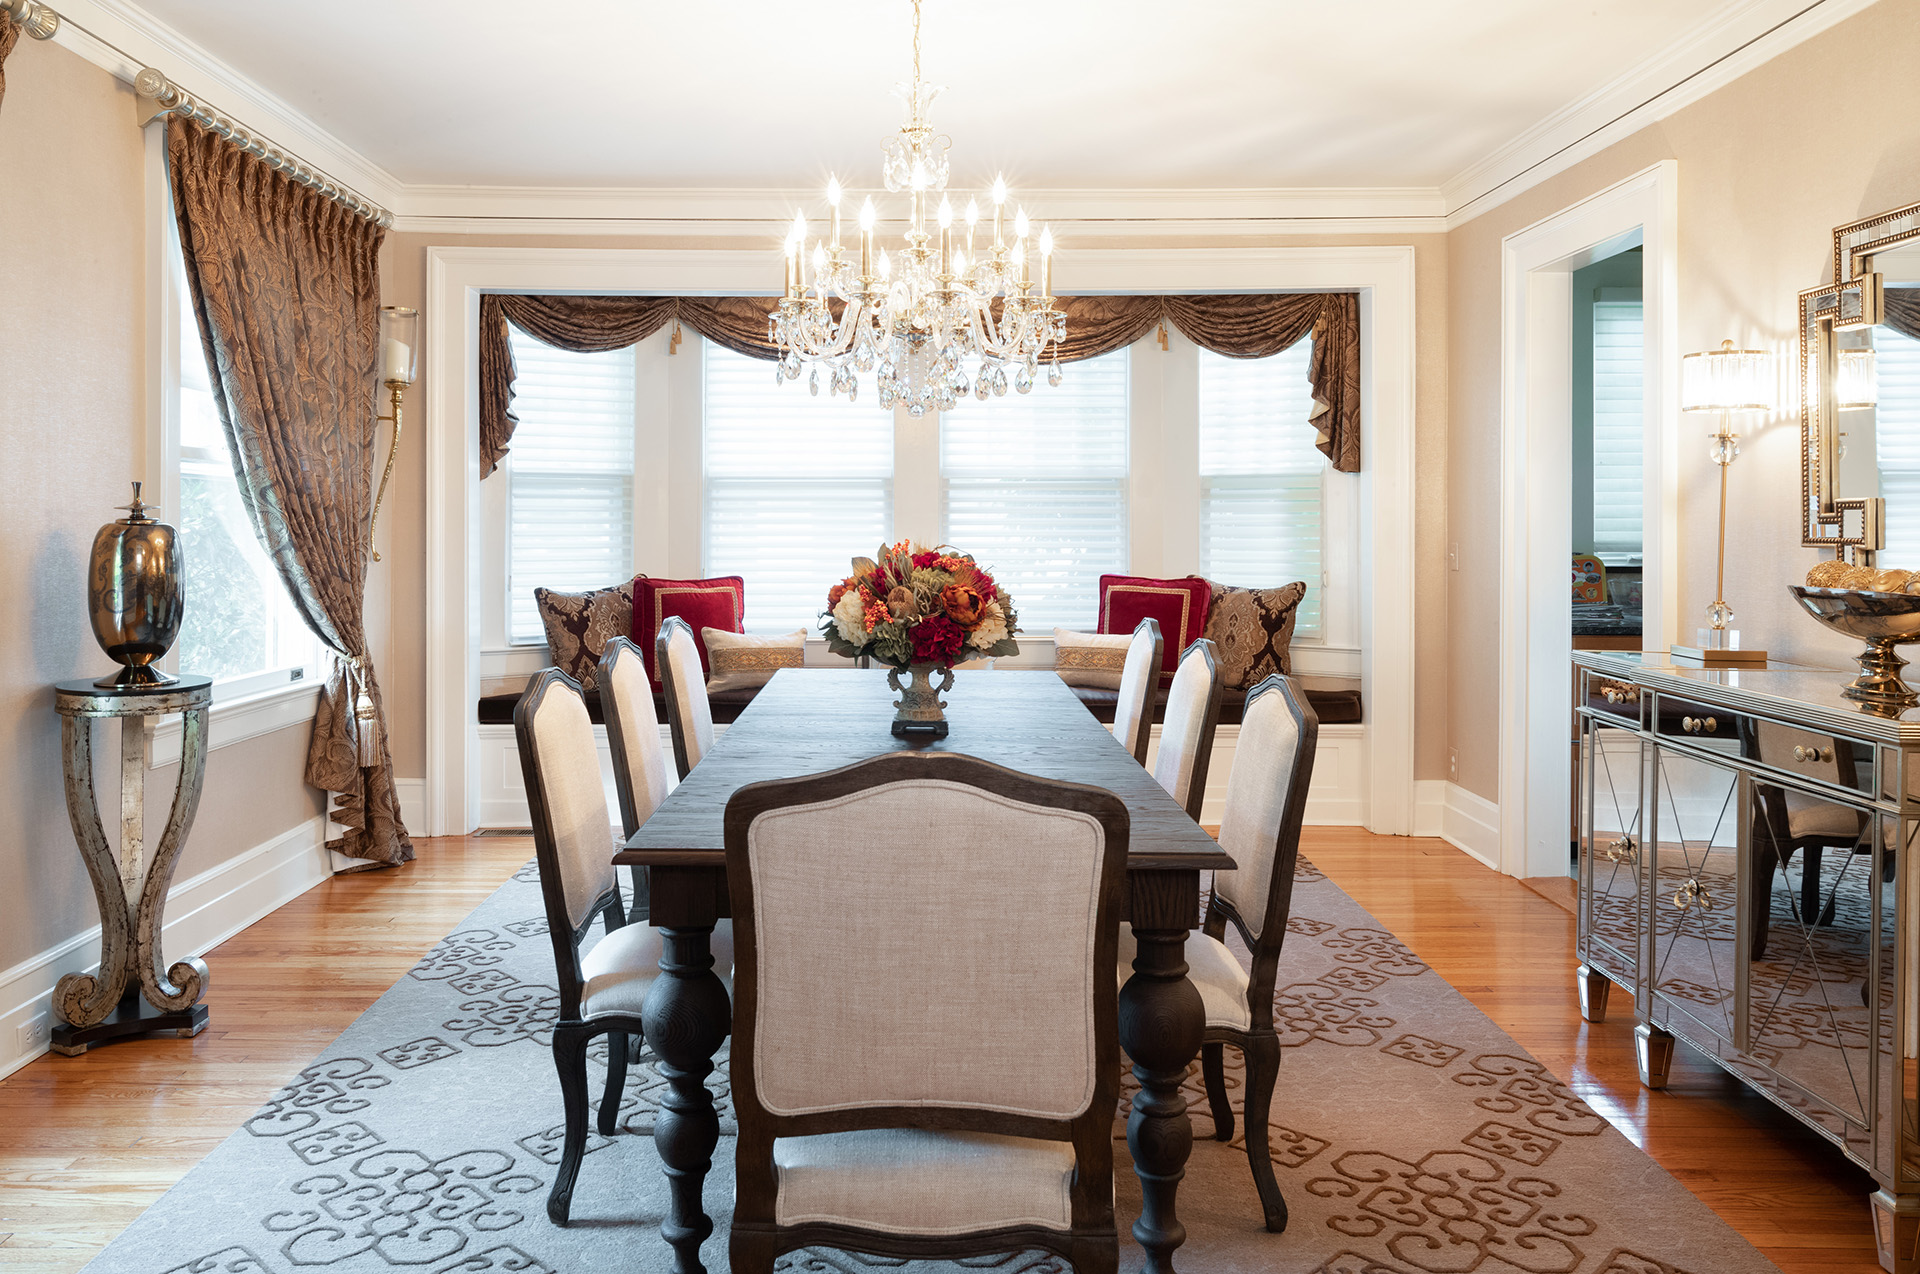 A photo of a modern dining room with a rectangular table, six chairs, a chandelier, and a large mirror on the wall.